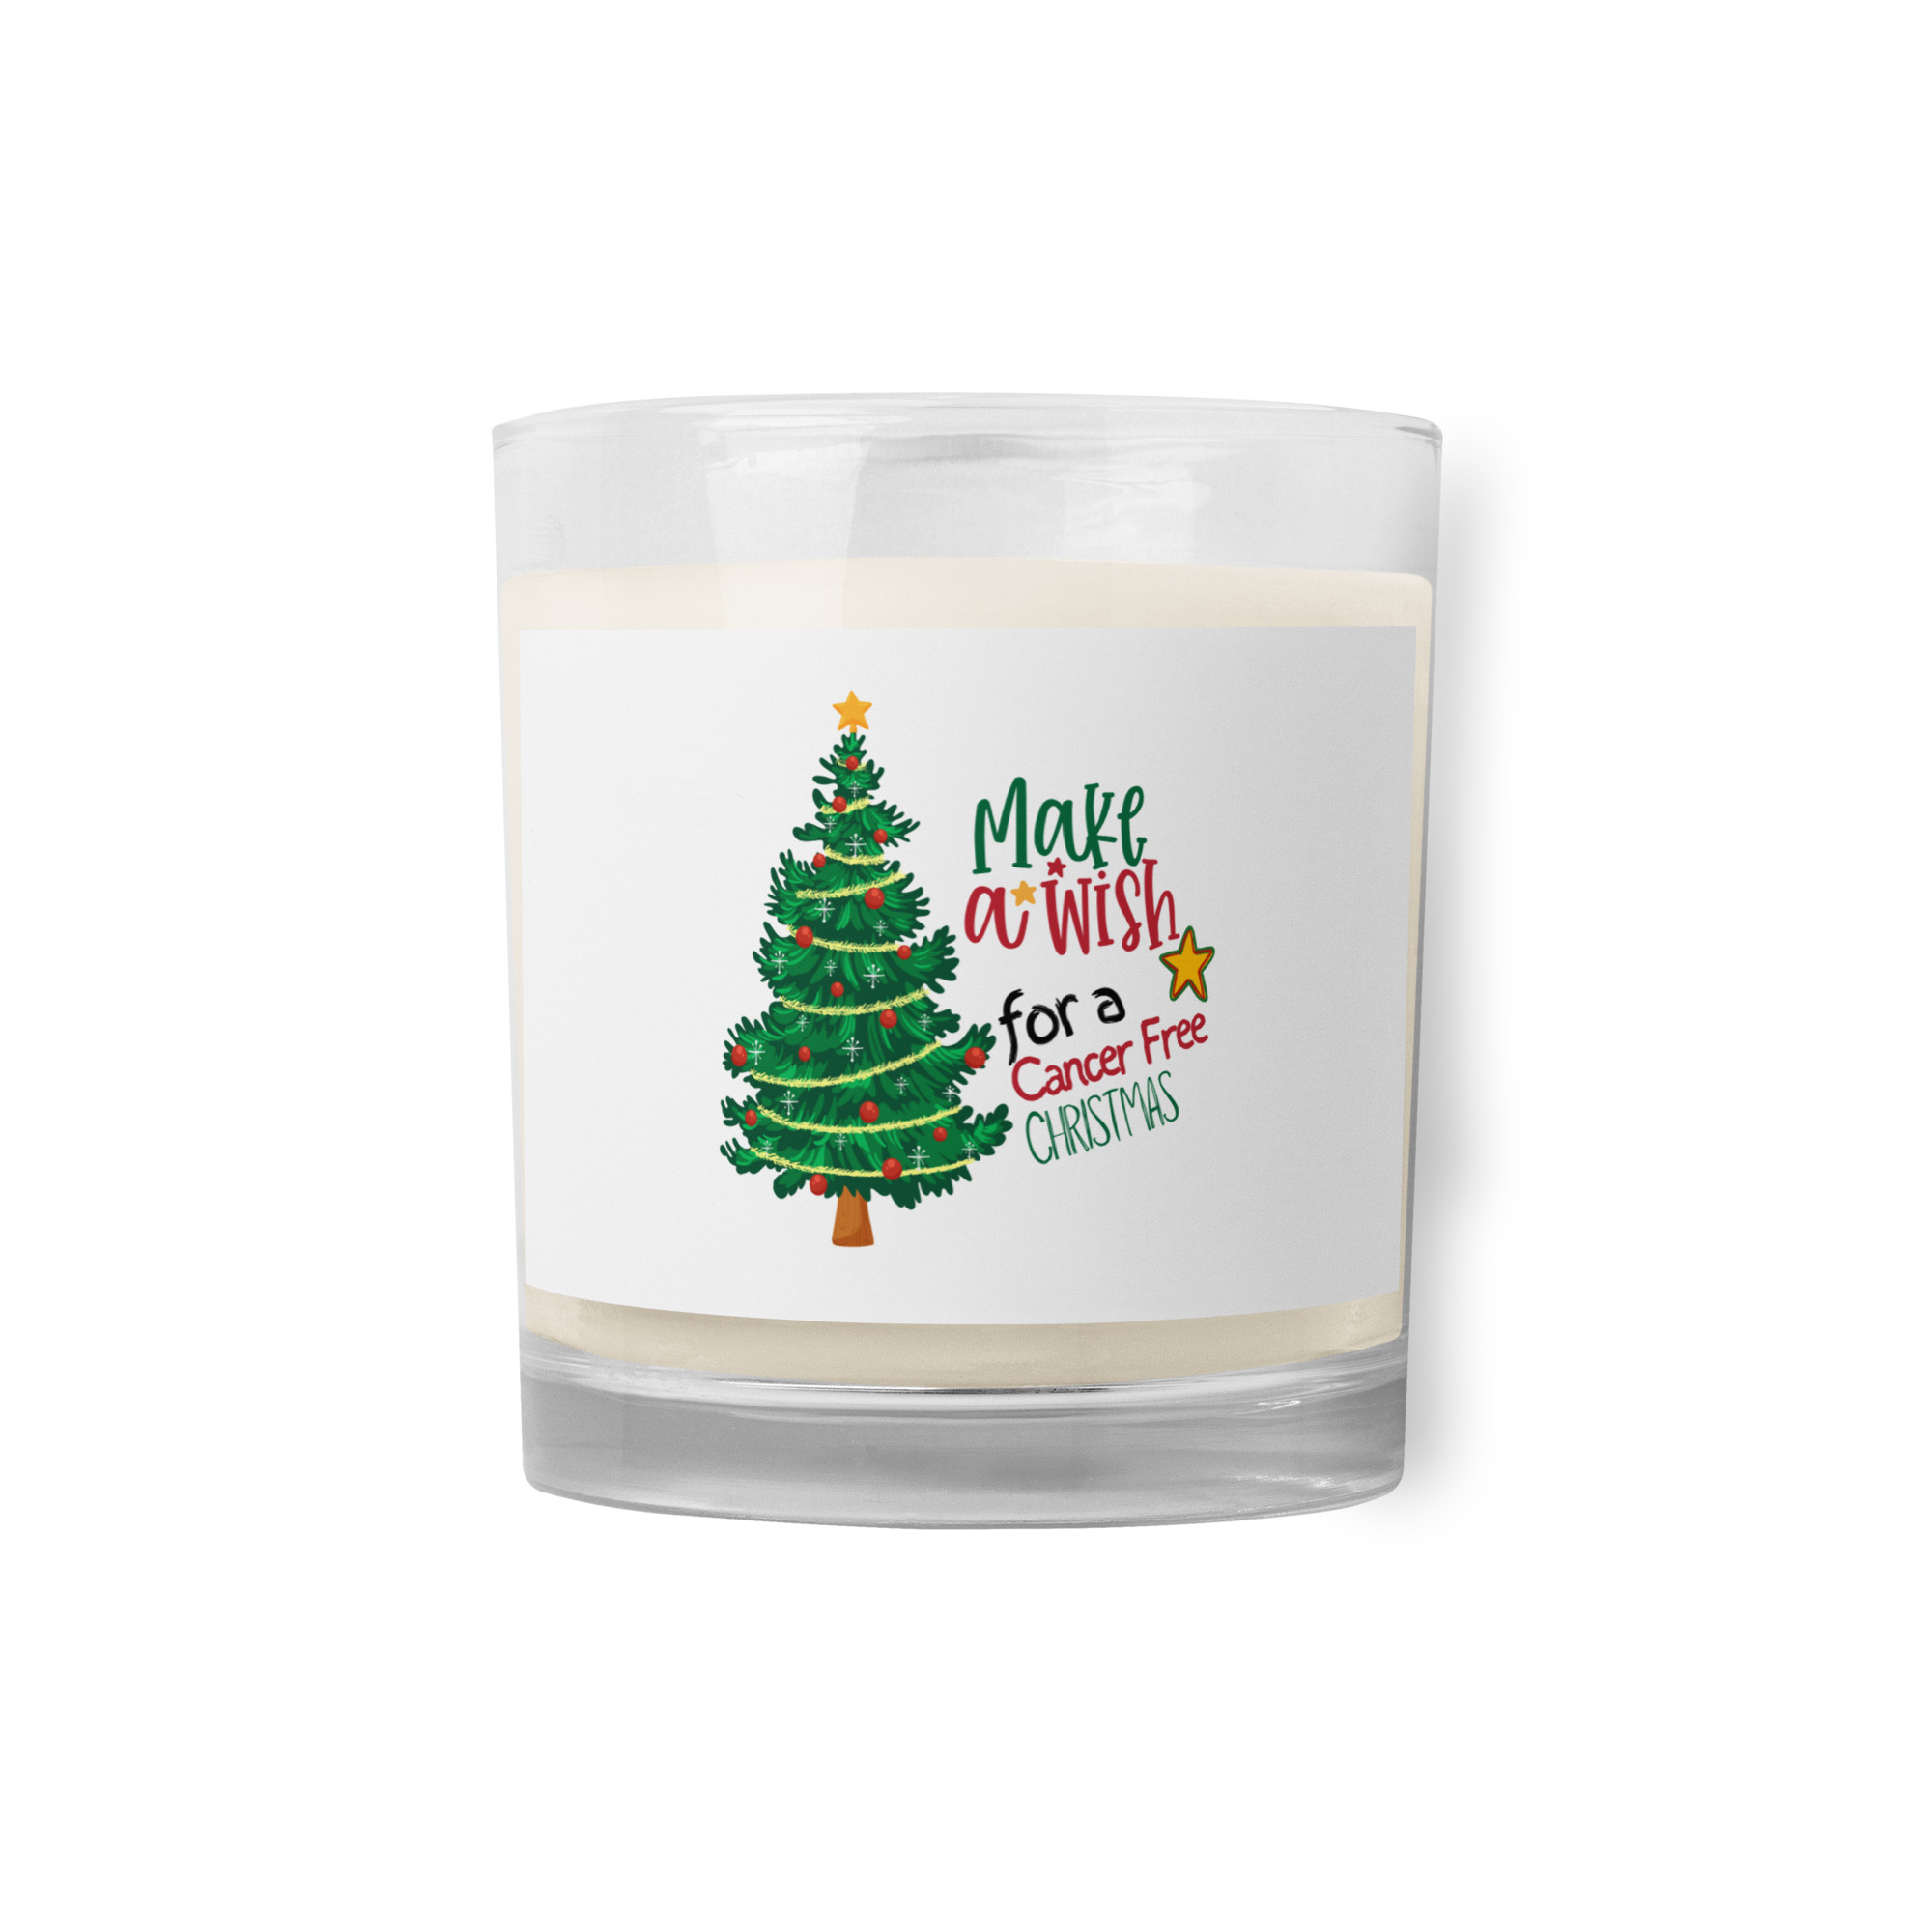 glass-jar-soy-wax-candle-white-front-65637398441e8.jpg